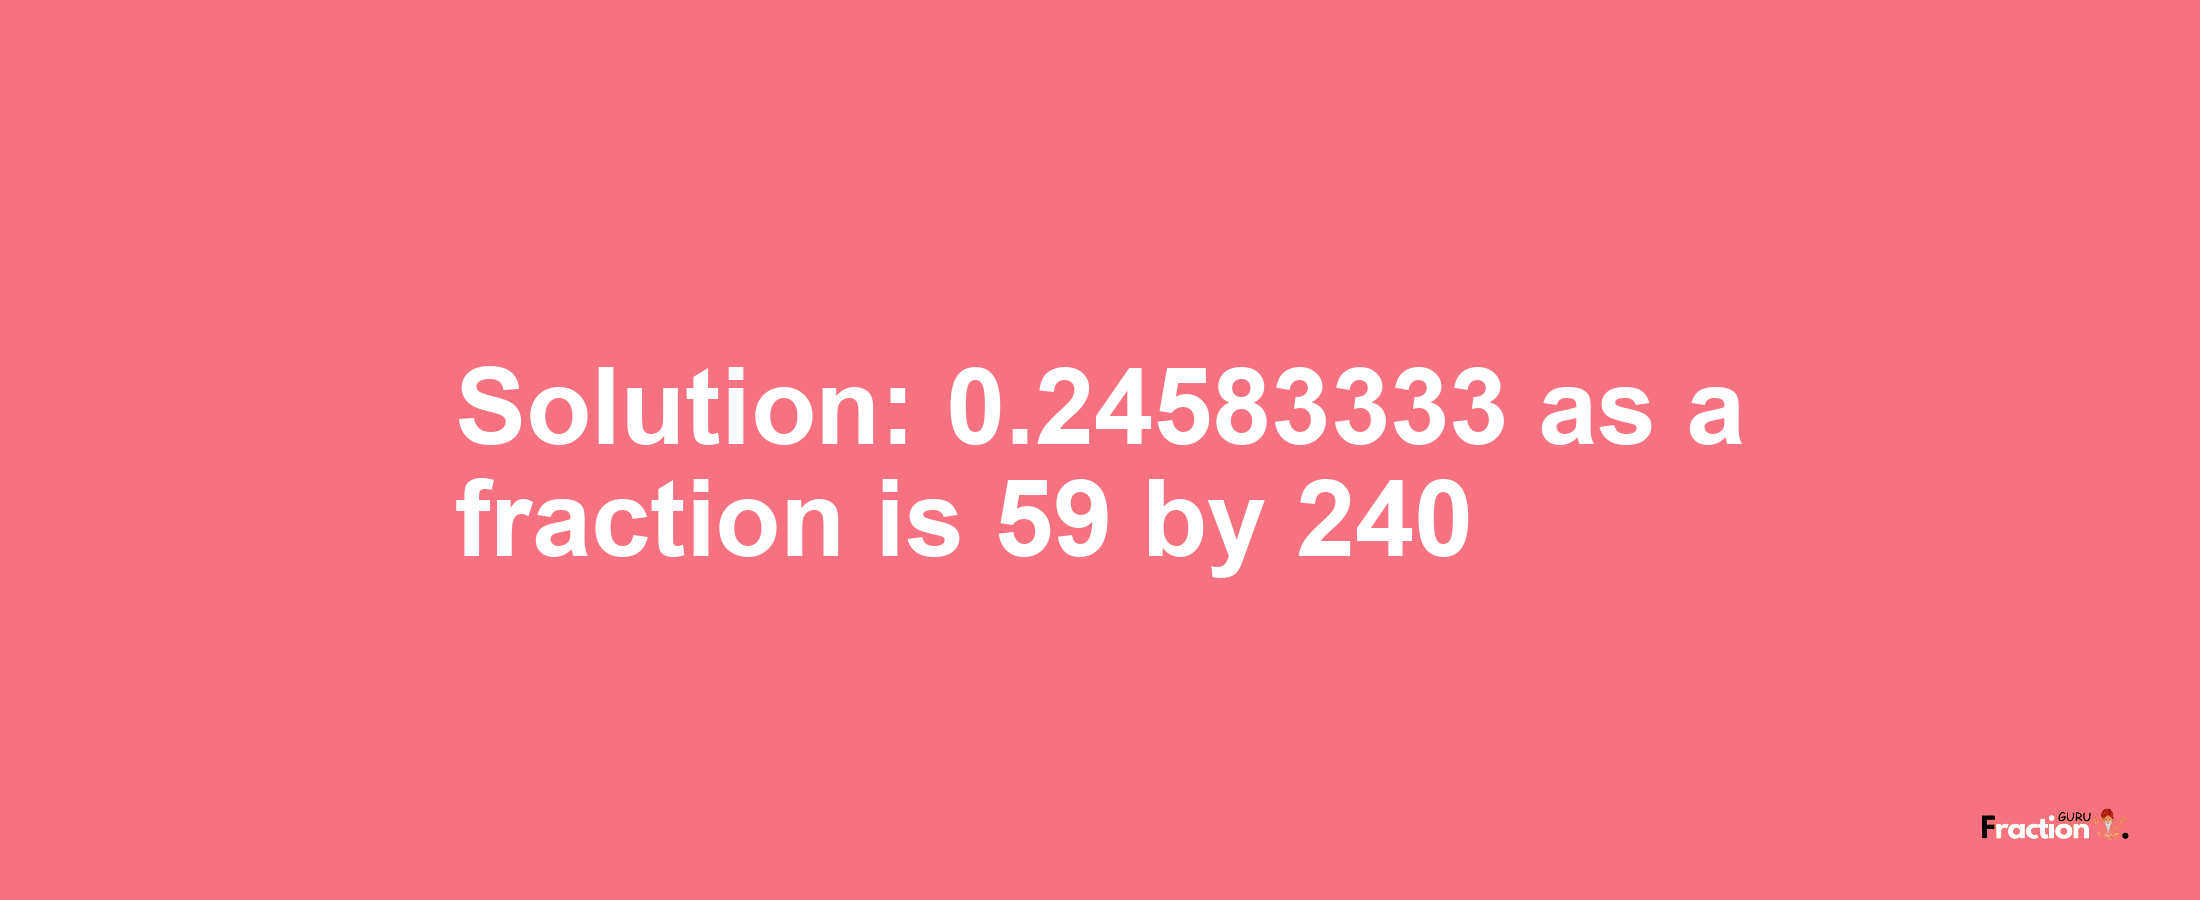 Solution:0.24583333 as a fraction is 59/240